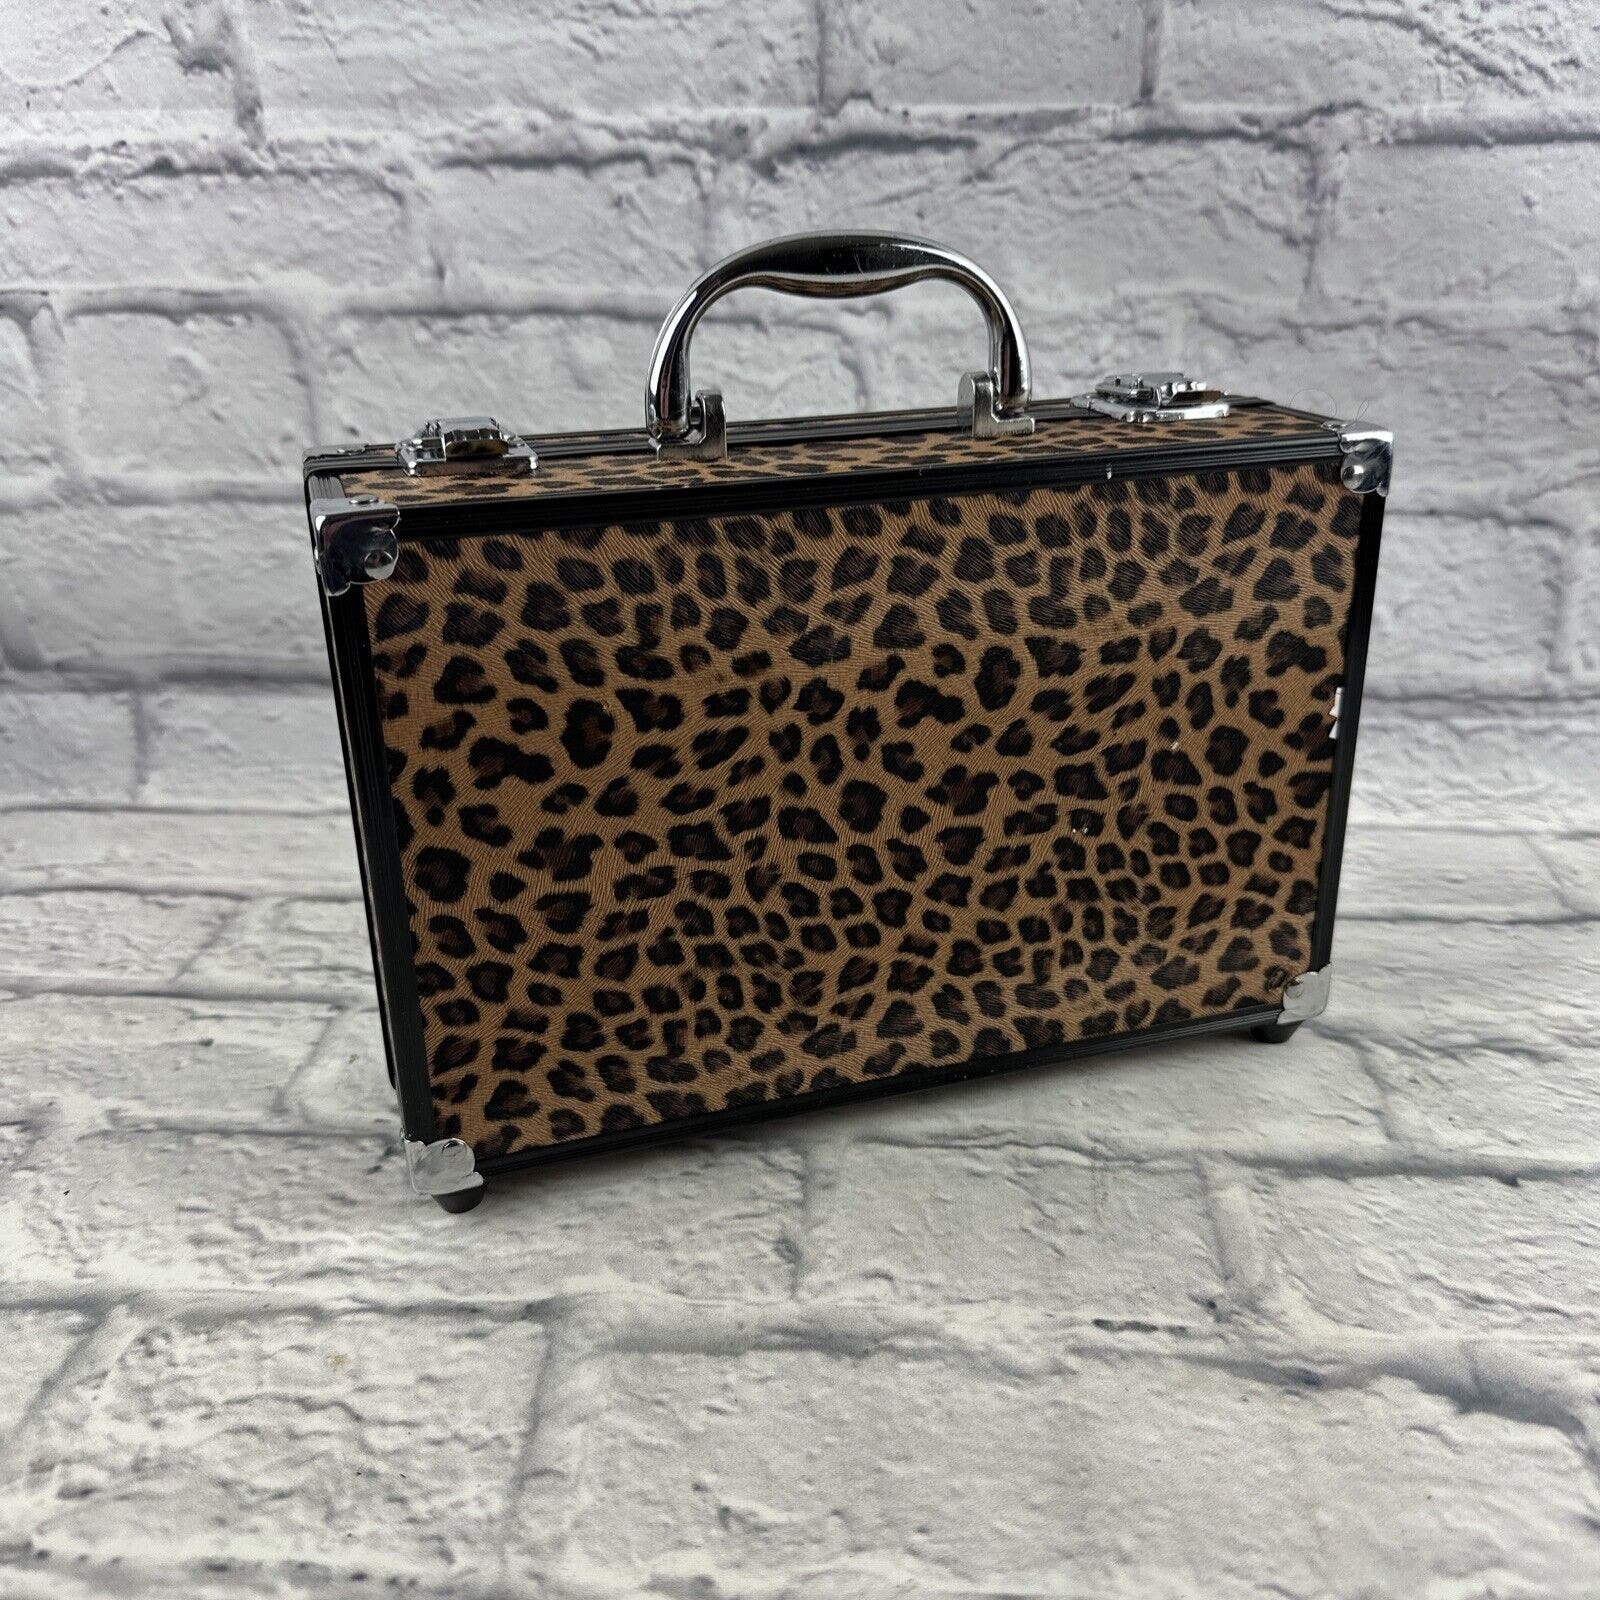 Leopard Print Makeup Hard Case. Unbranded. 10” By 6” By 4” 3sVYa51X1